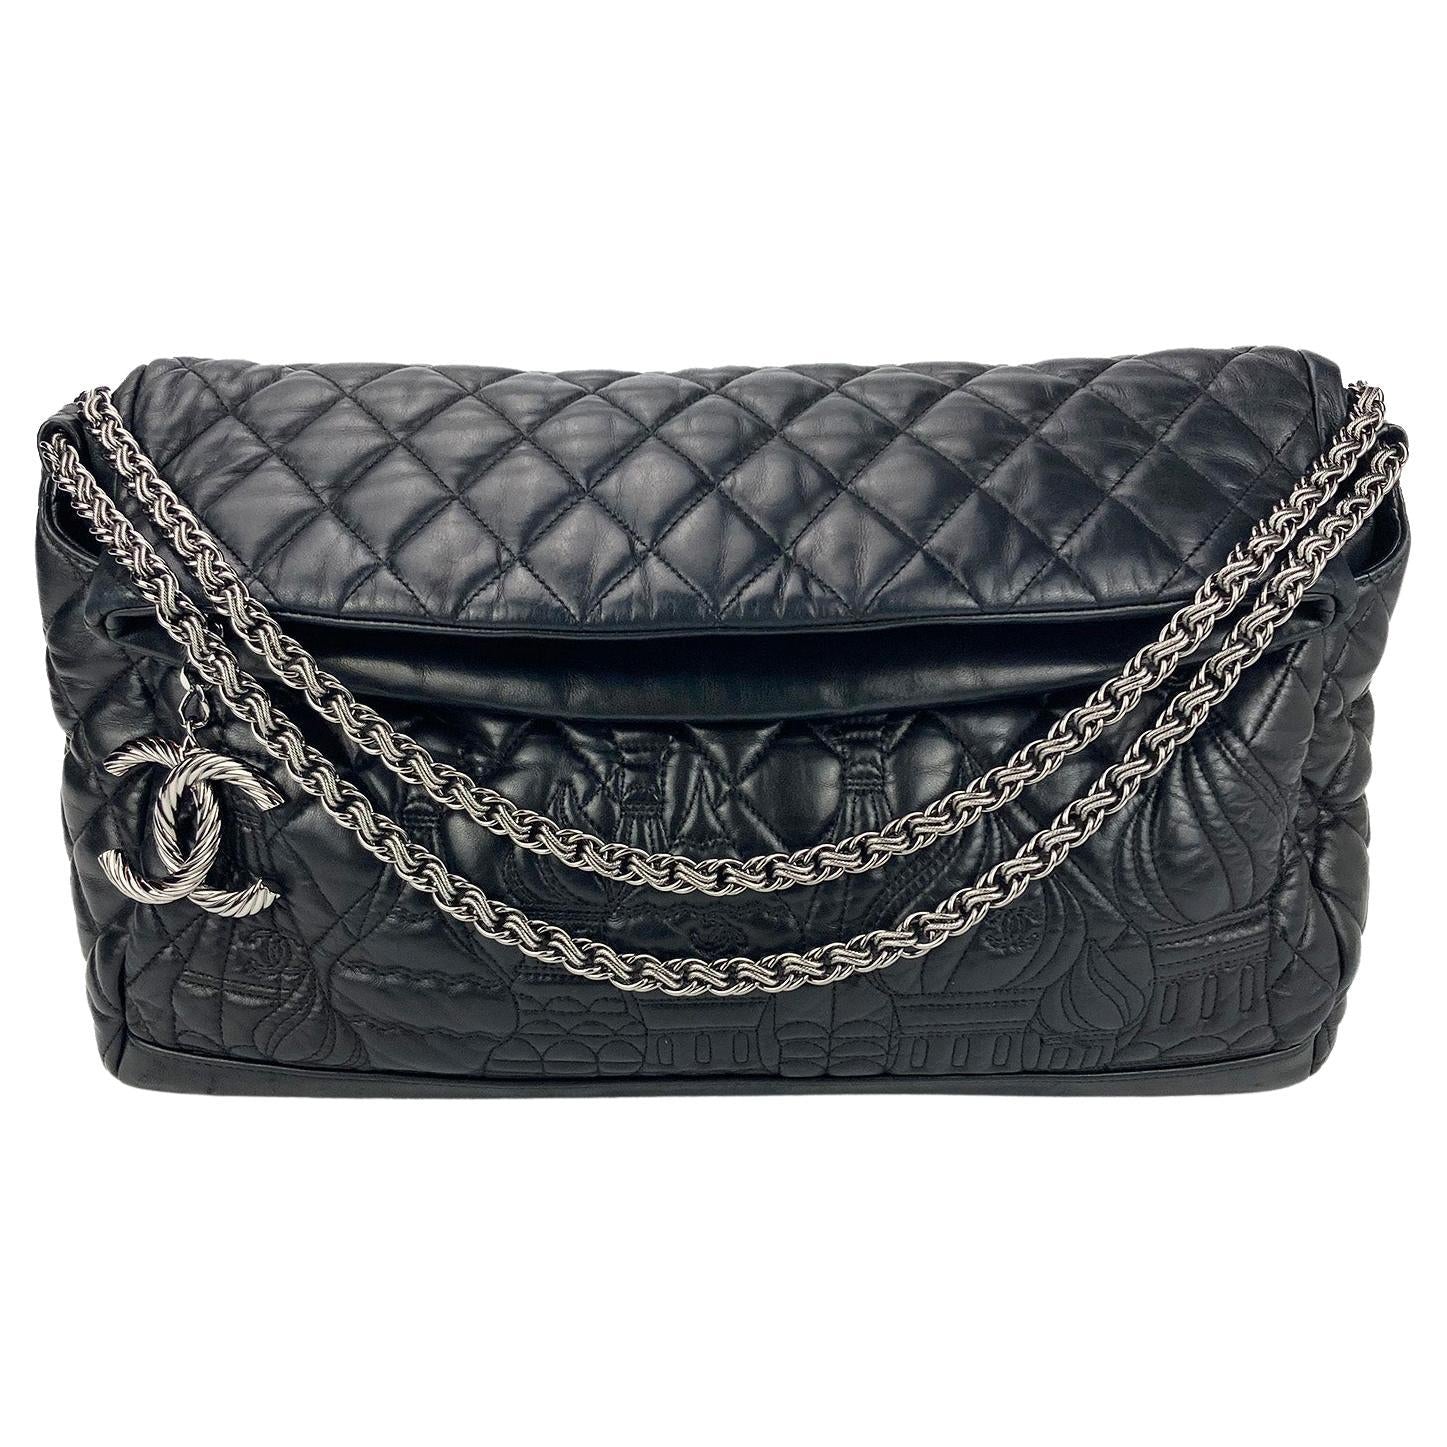 Chanel Chain Around Large Calfskin Leather Flap Bag